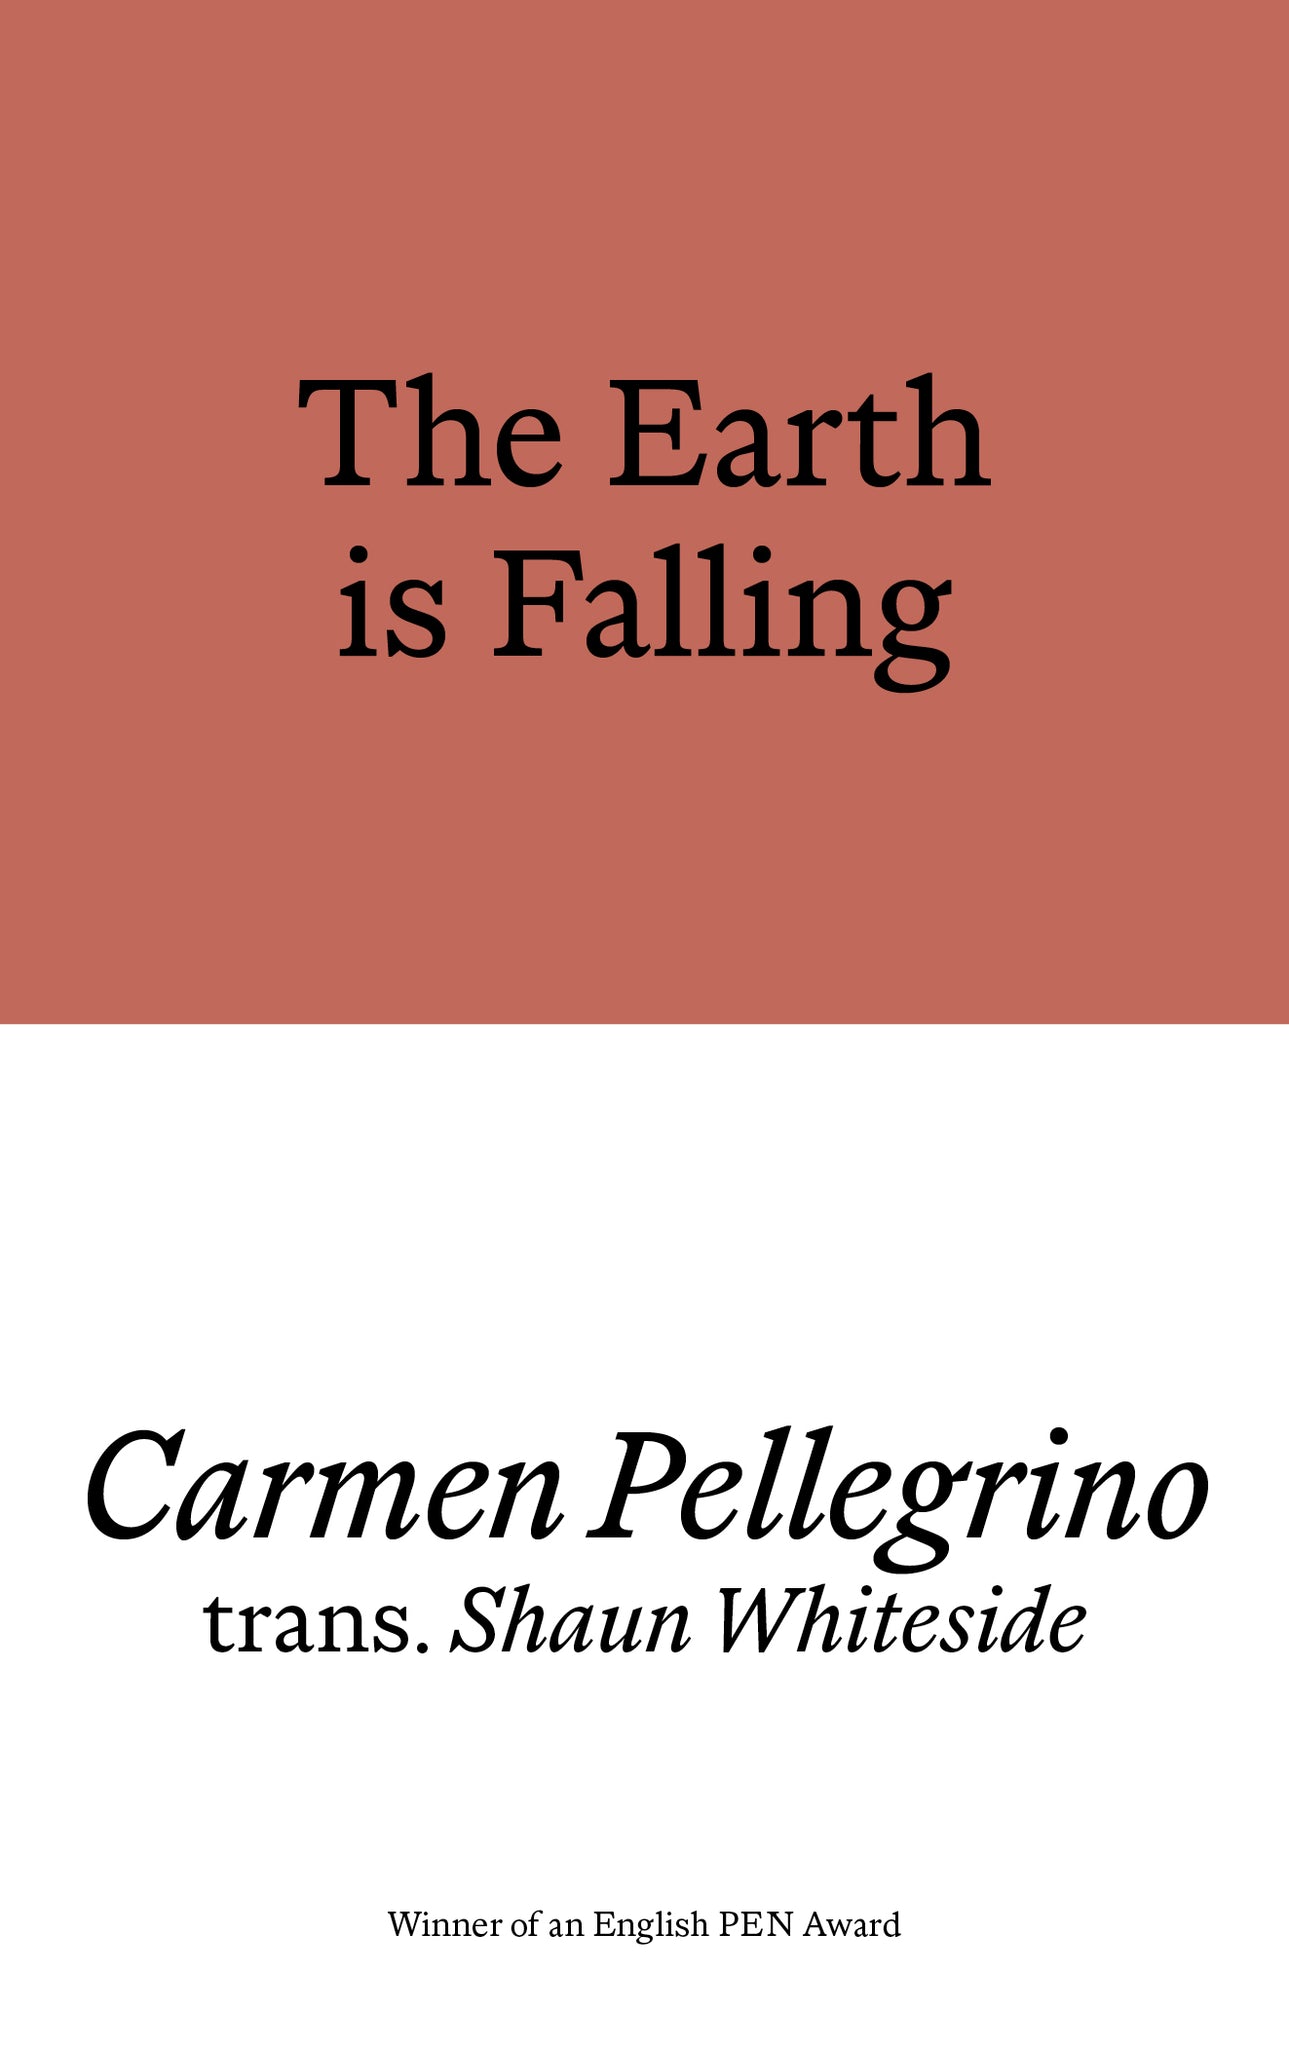 Earth is Falling, the cover